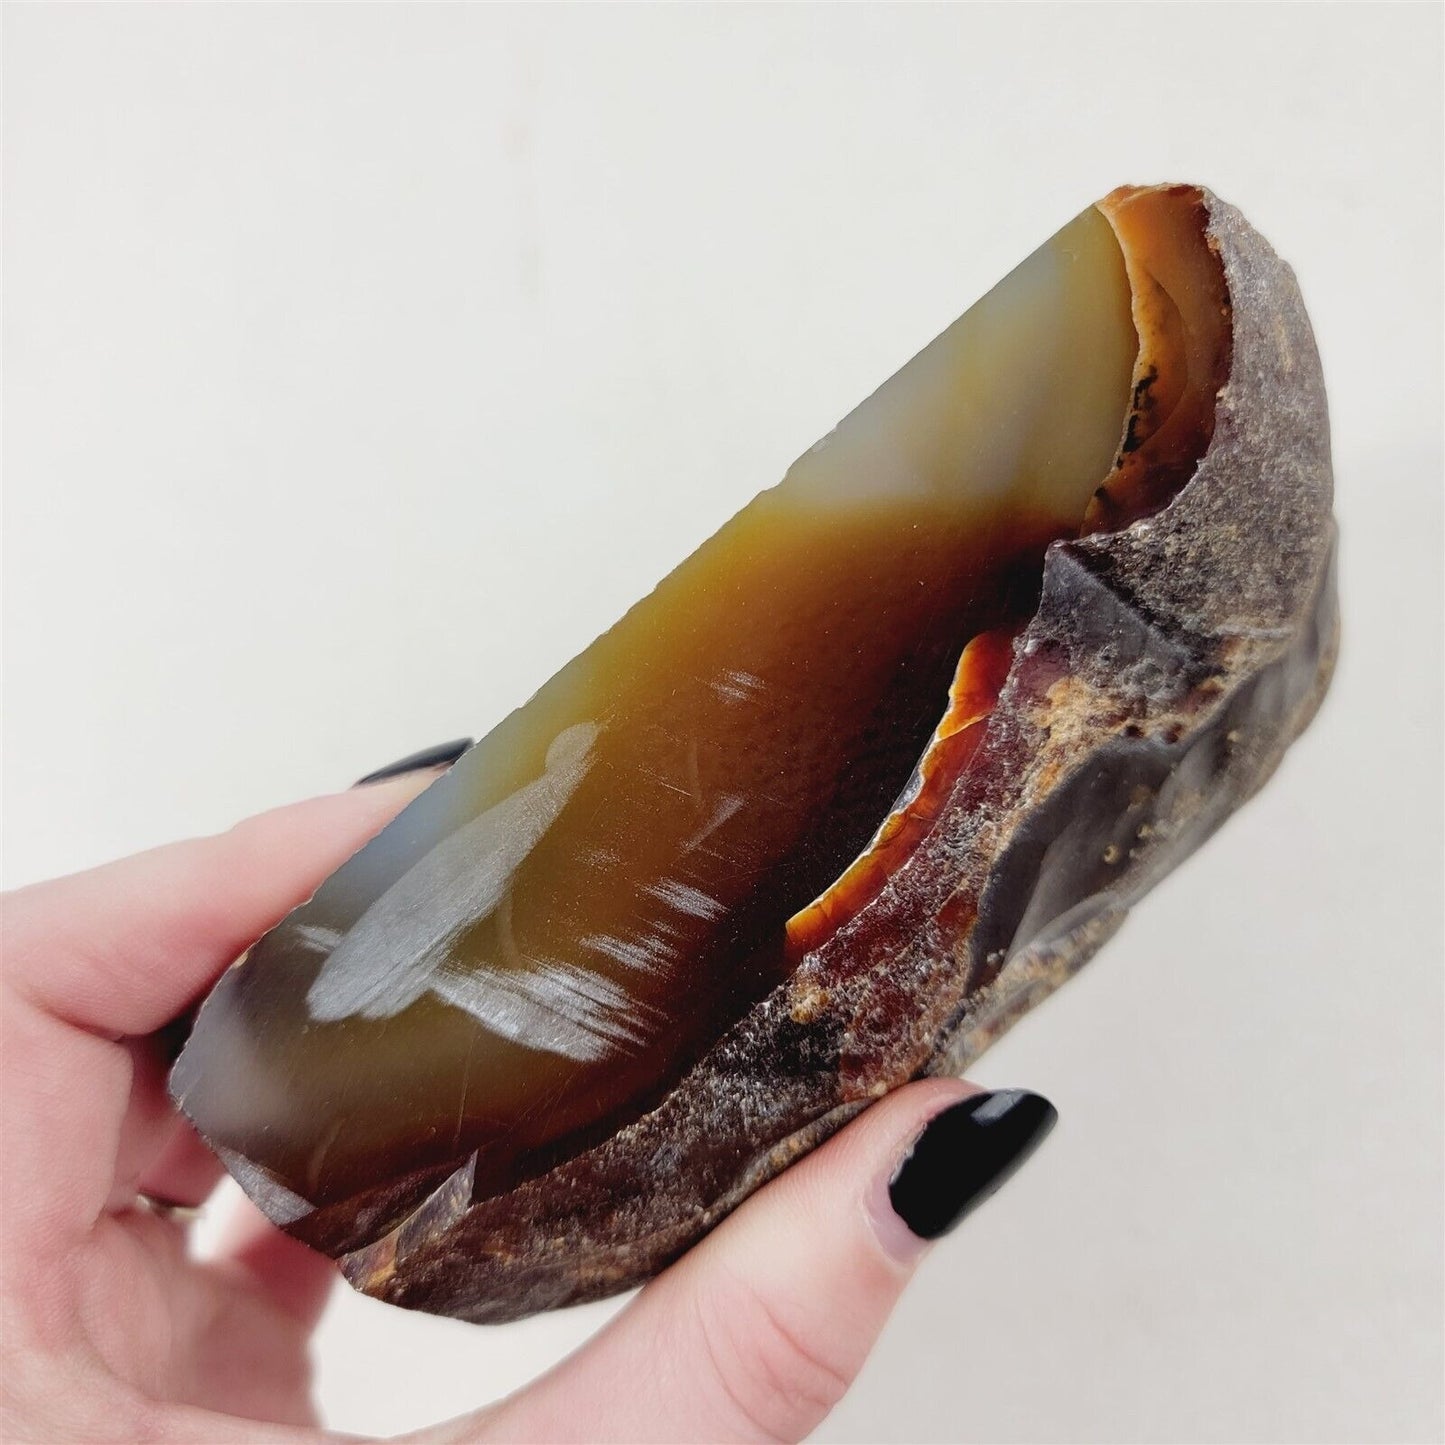 2 Cut Polished Agates Bookends Rocks Lapidary 3+ lbs each